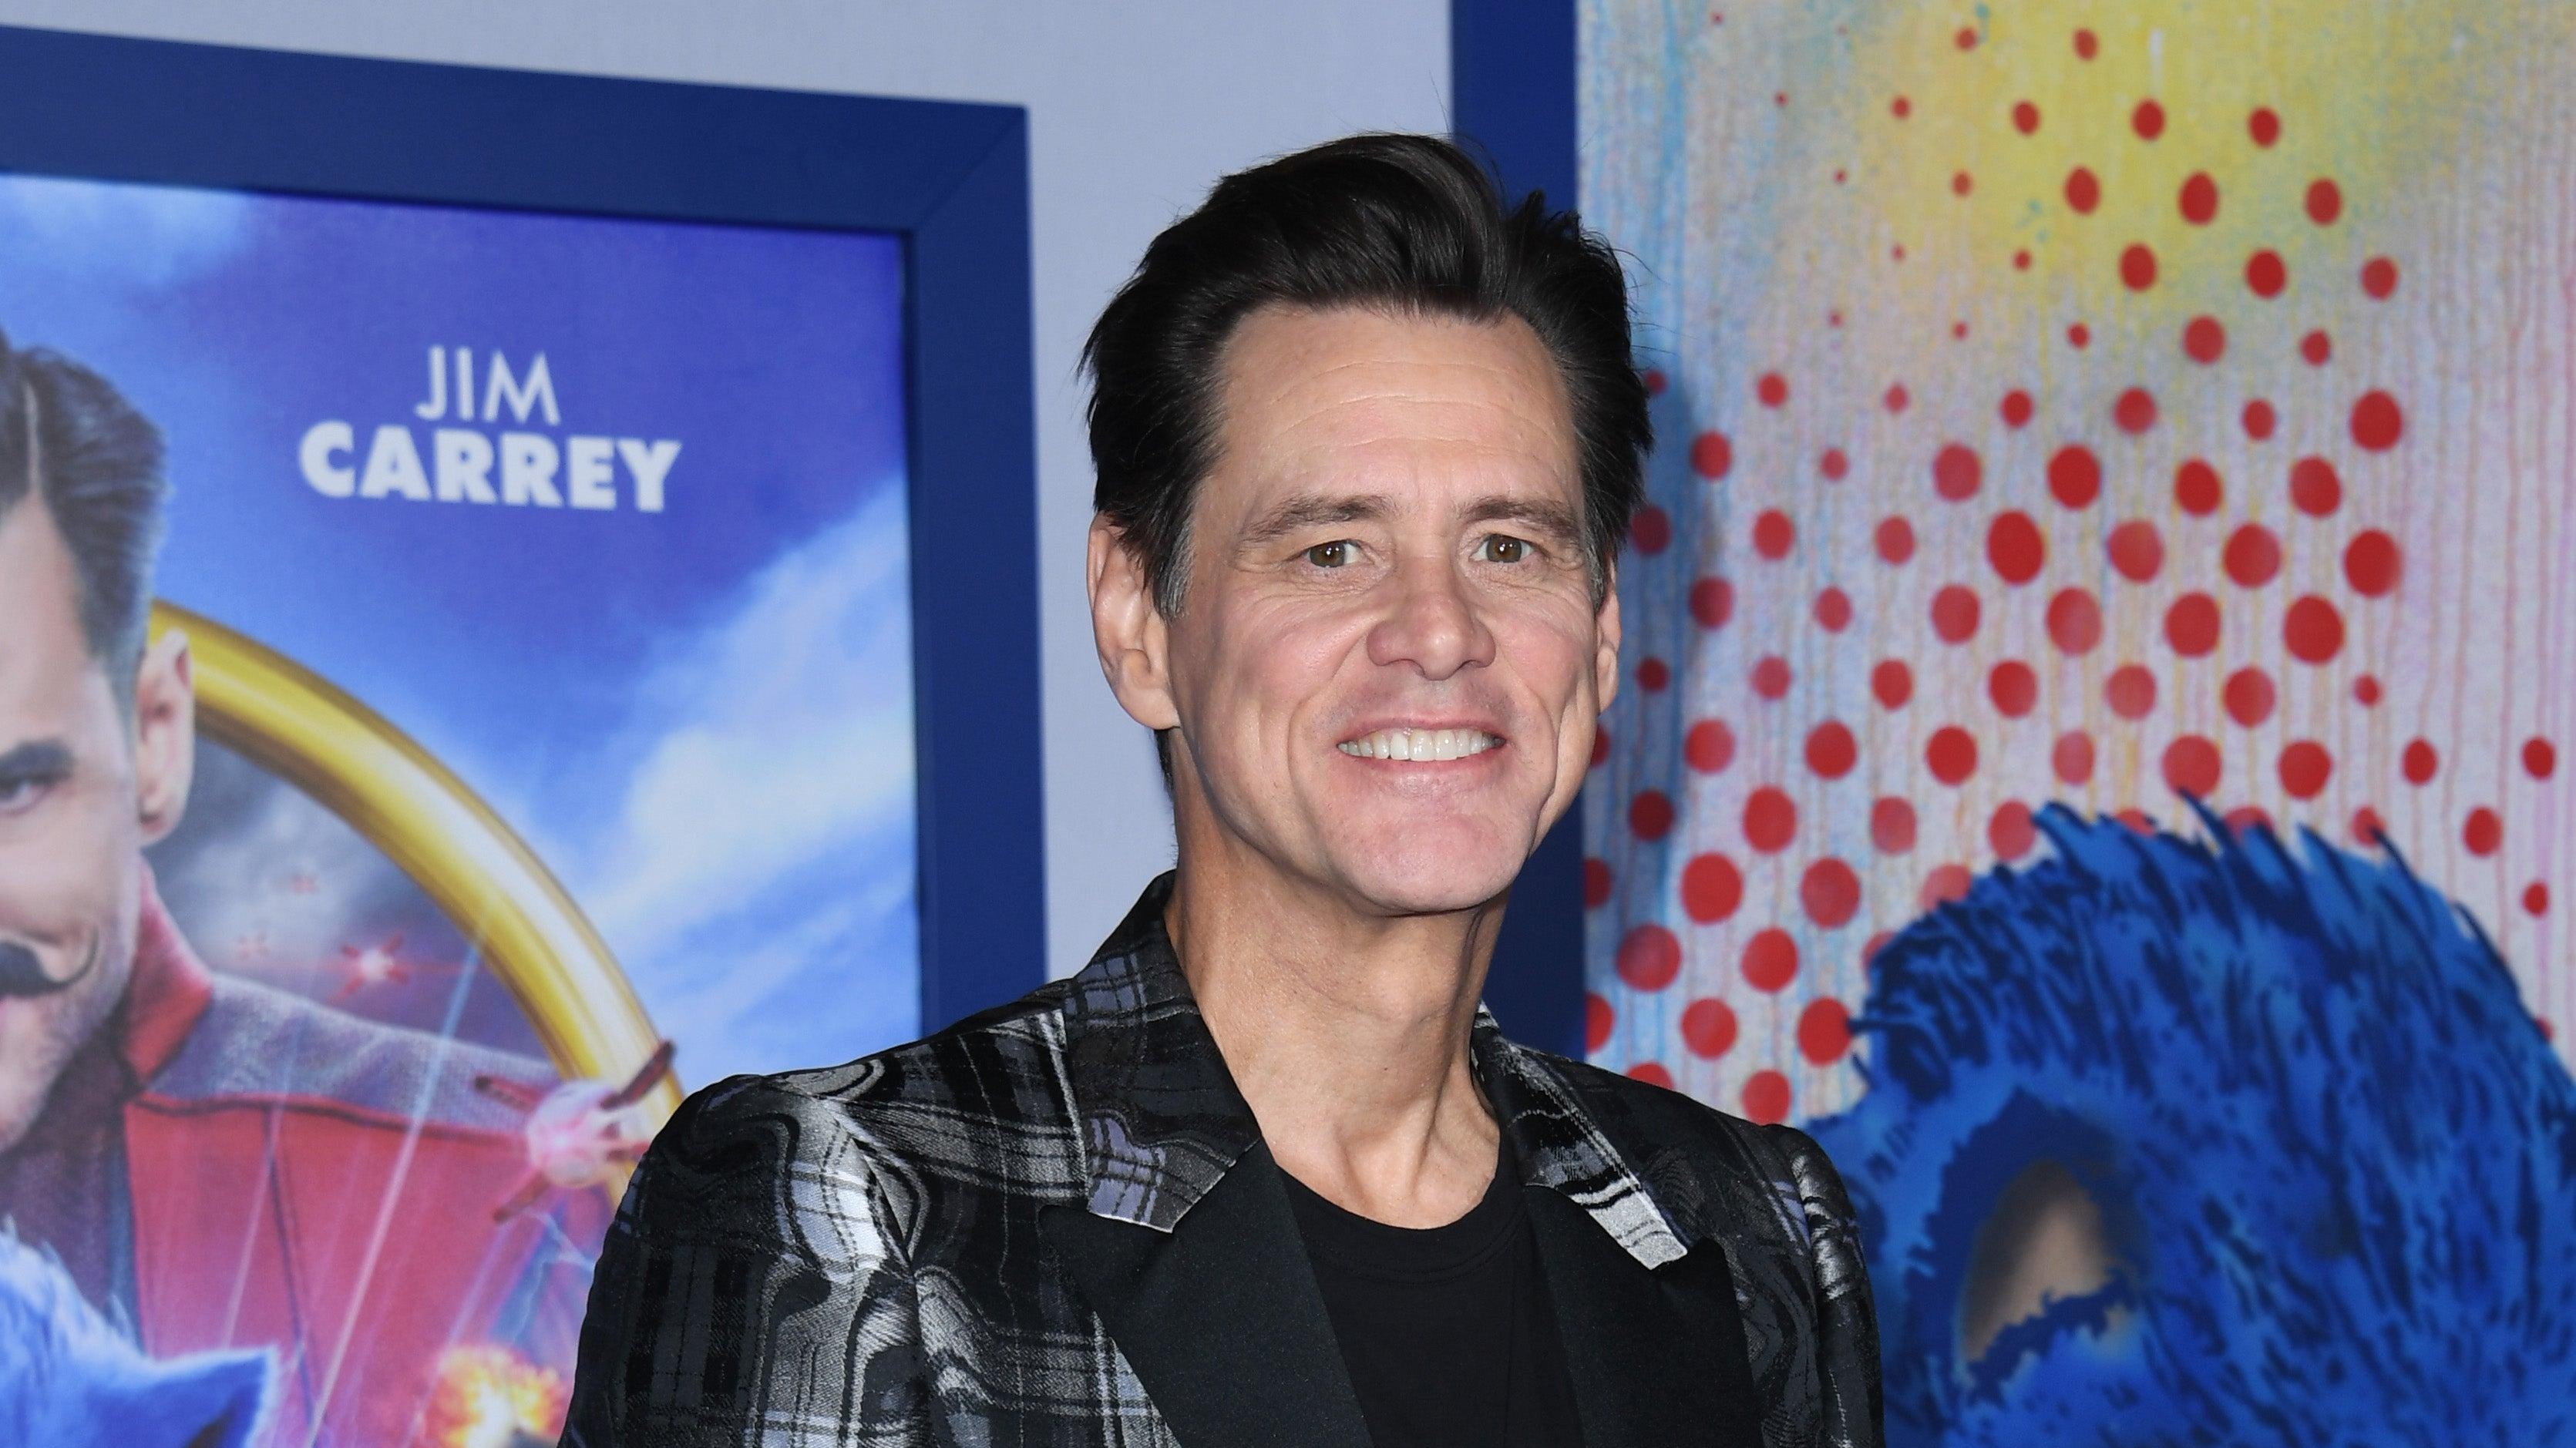 Jim Carrey says that celebrities are no longer the “cool club” after Will Smith slapped Chris Rock